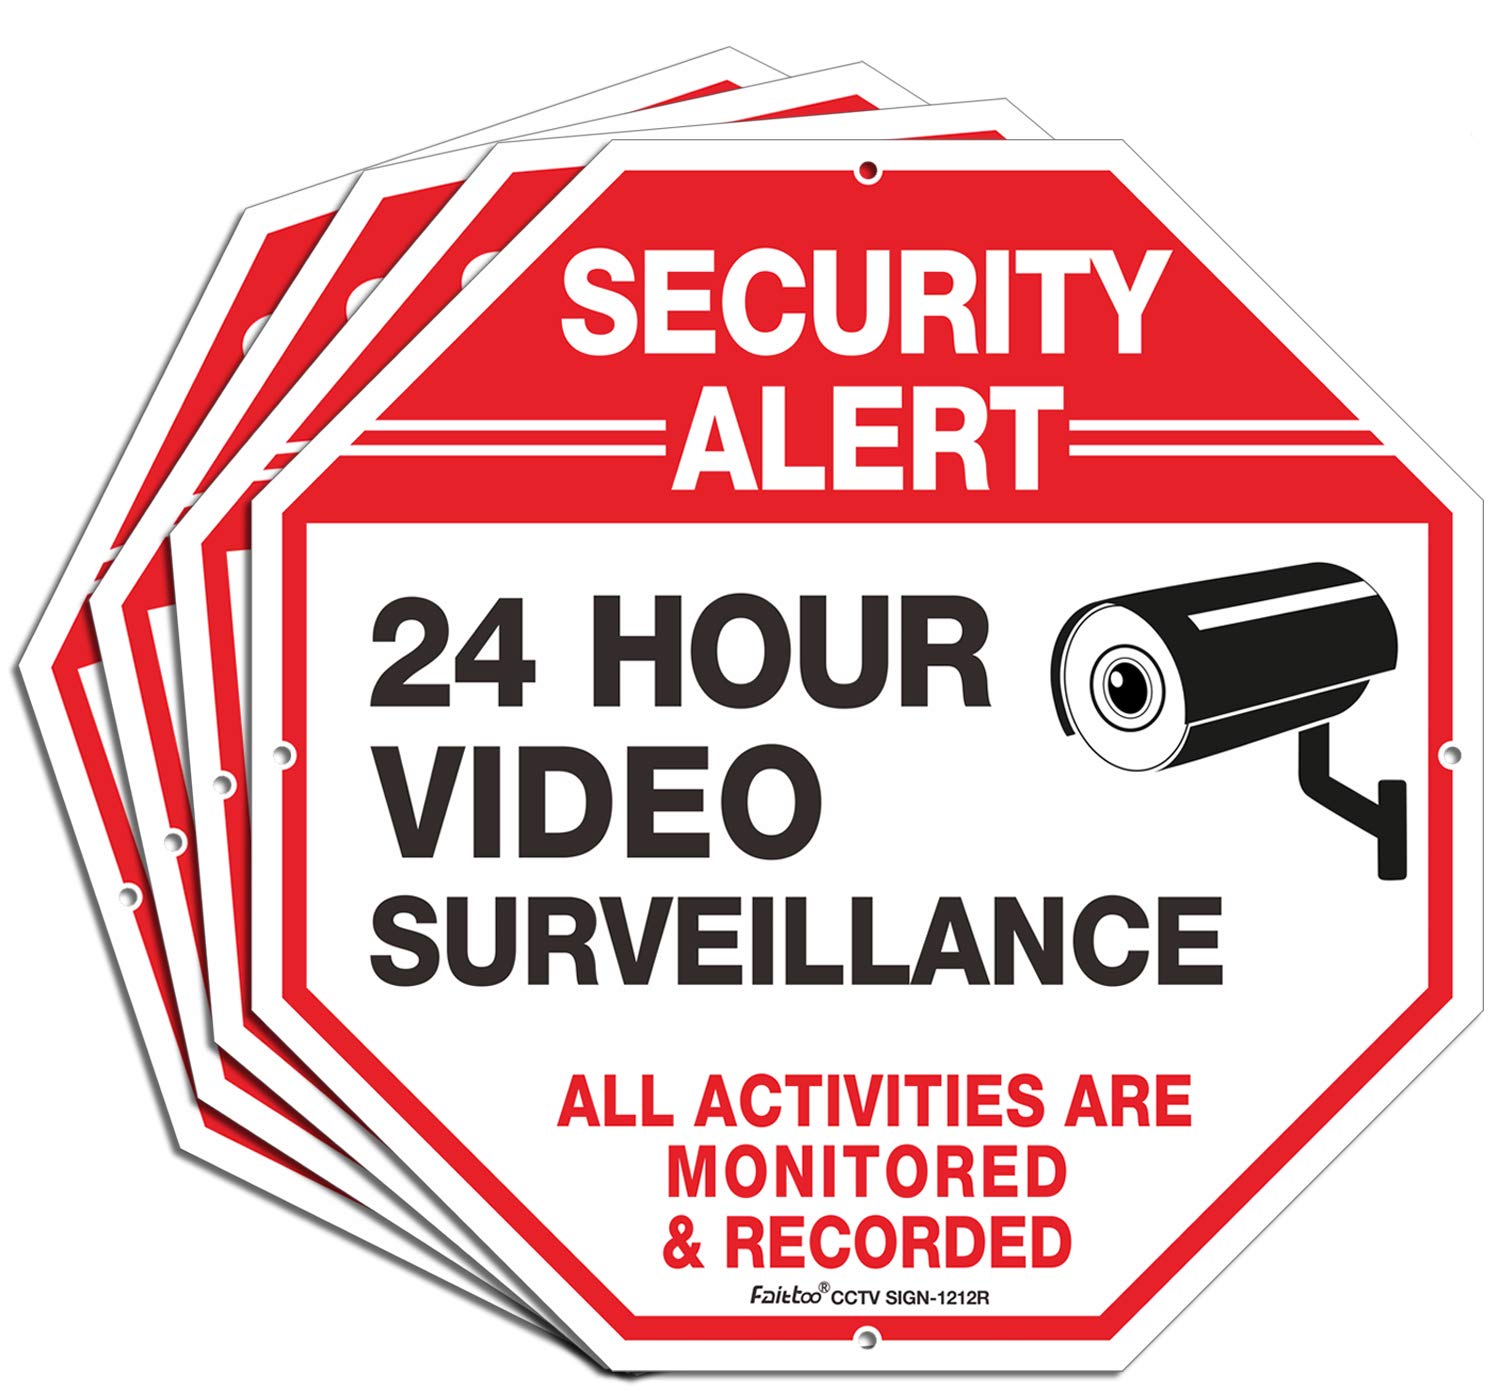 Video Surveillance Signs, Security Signs,Octagon 12 x12 Inches 40Mil Thick Aluminum Reflective Sign for Home Business CCTV Security Camera, UV Protected &amp; Waterproof, 4 Pack